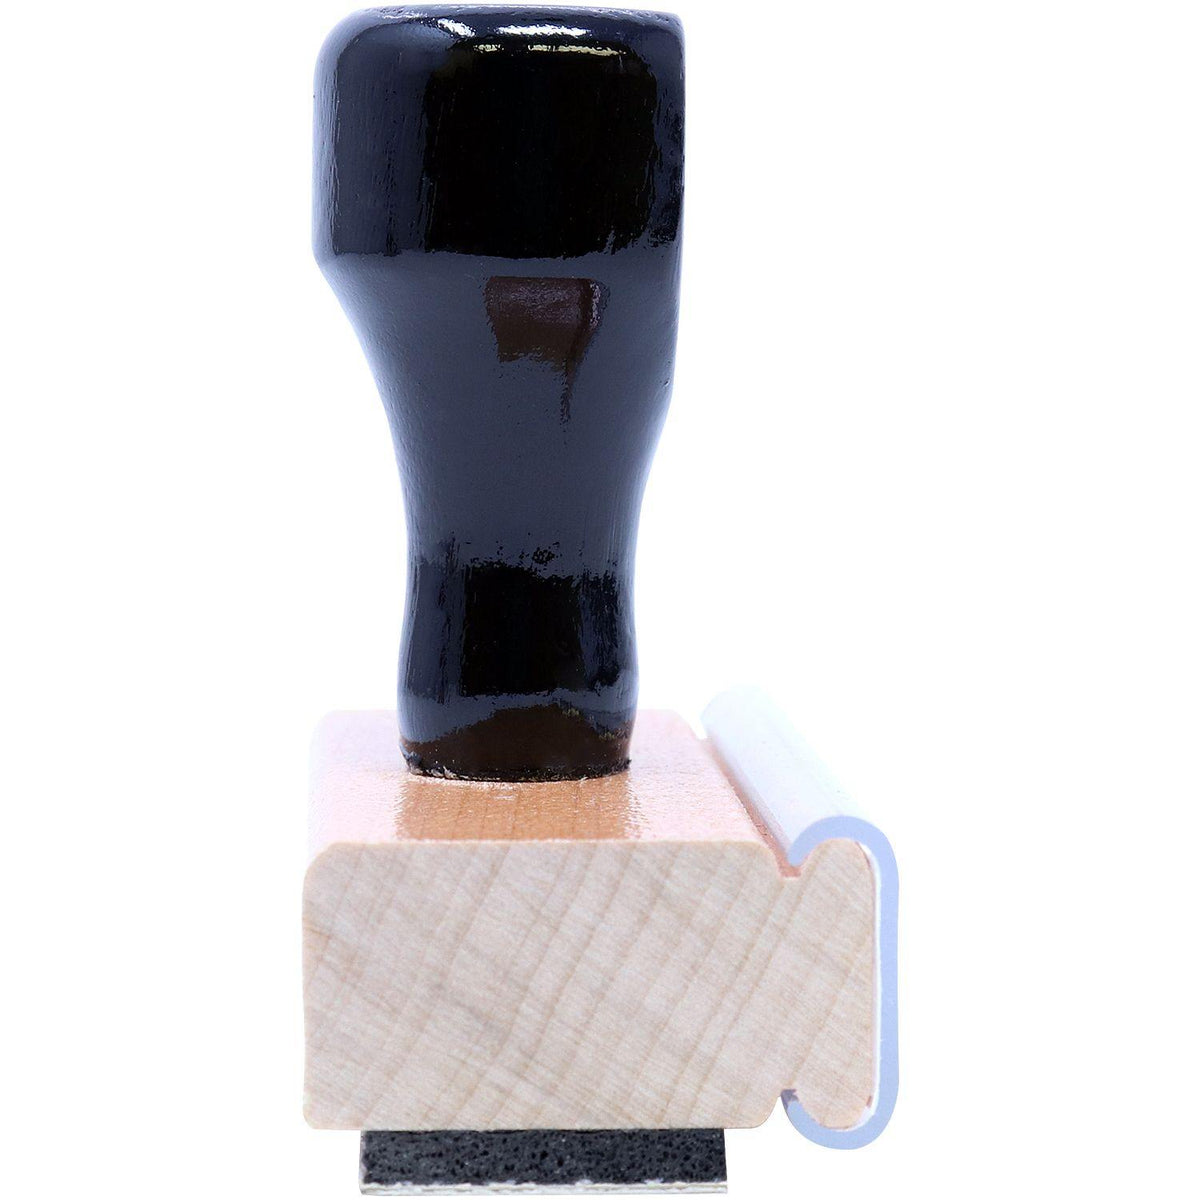 Large Void with Box Rubber Stamp - Engineer Seal Stamps - Brand_Acorn, Impression Size_Large, Stamp Type_Regular Stamp, Type of Use_Business, Type of Use_General, Type of Use_Office, Type of Use_Professional